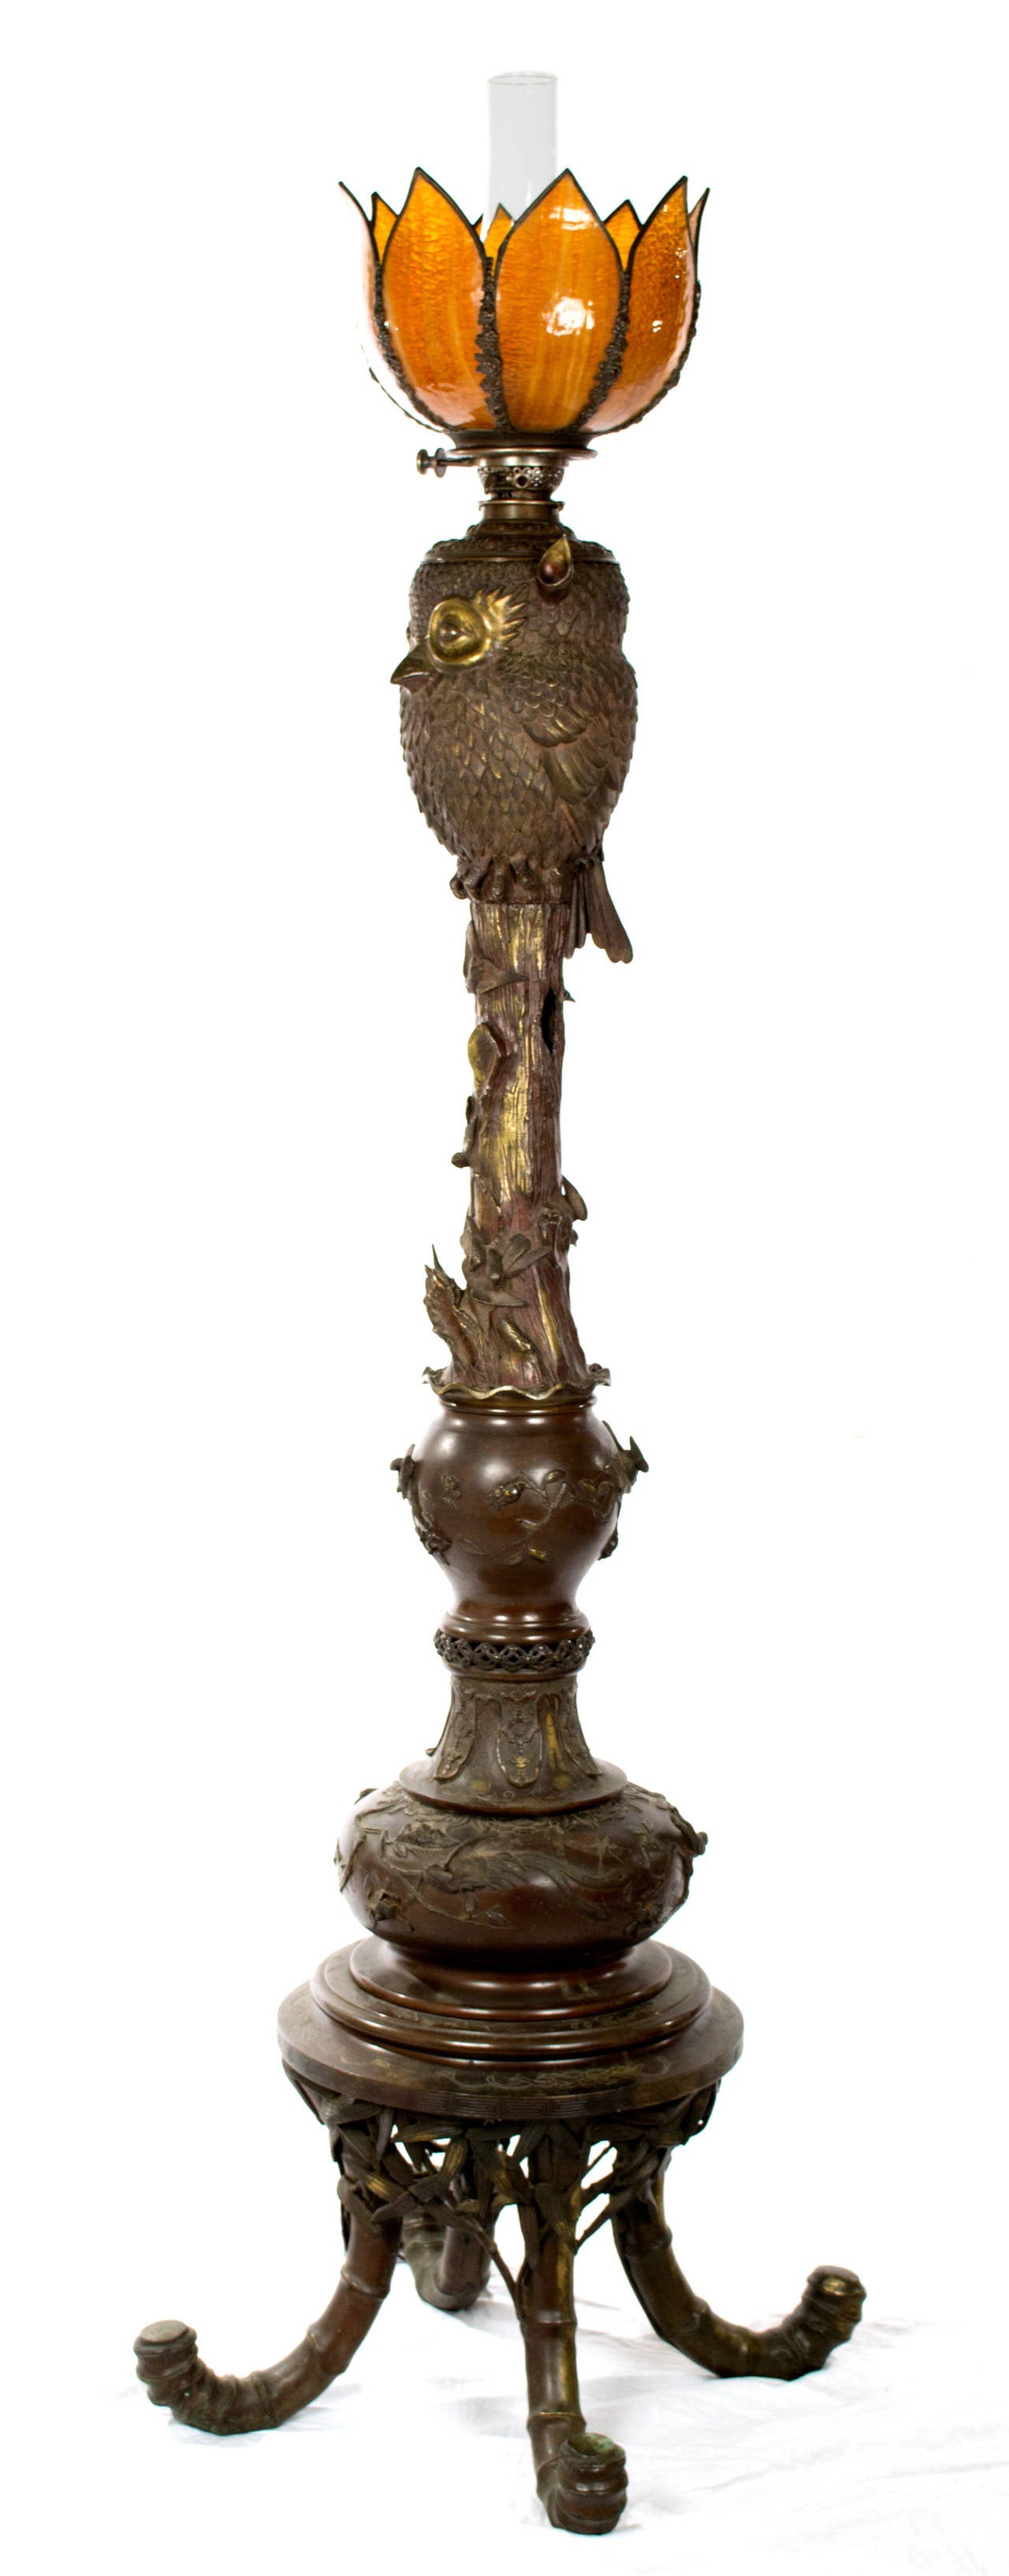 This large floor lamp was made in Japan during the first quarter of the 20th century, and features a large owl with sitting atop a column in the form of a tree truck festooned with vines and supported by four large cane feet. The lamp is surmounted